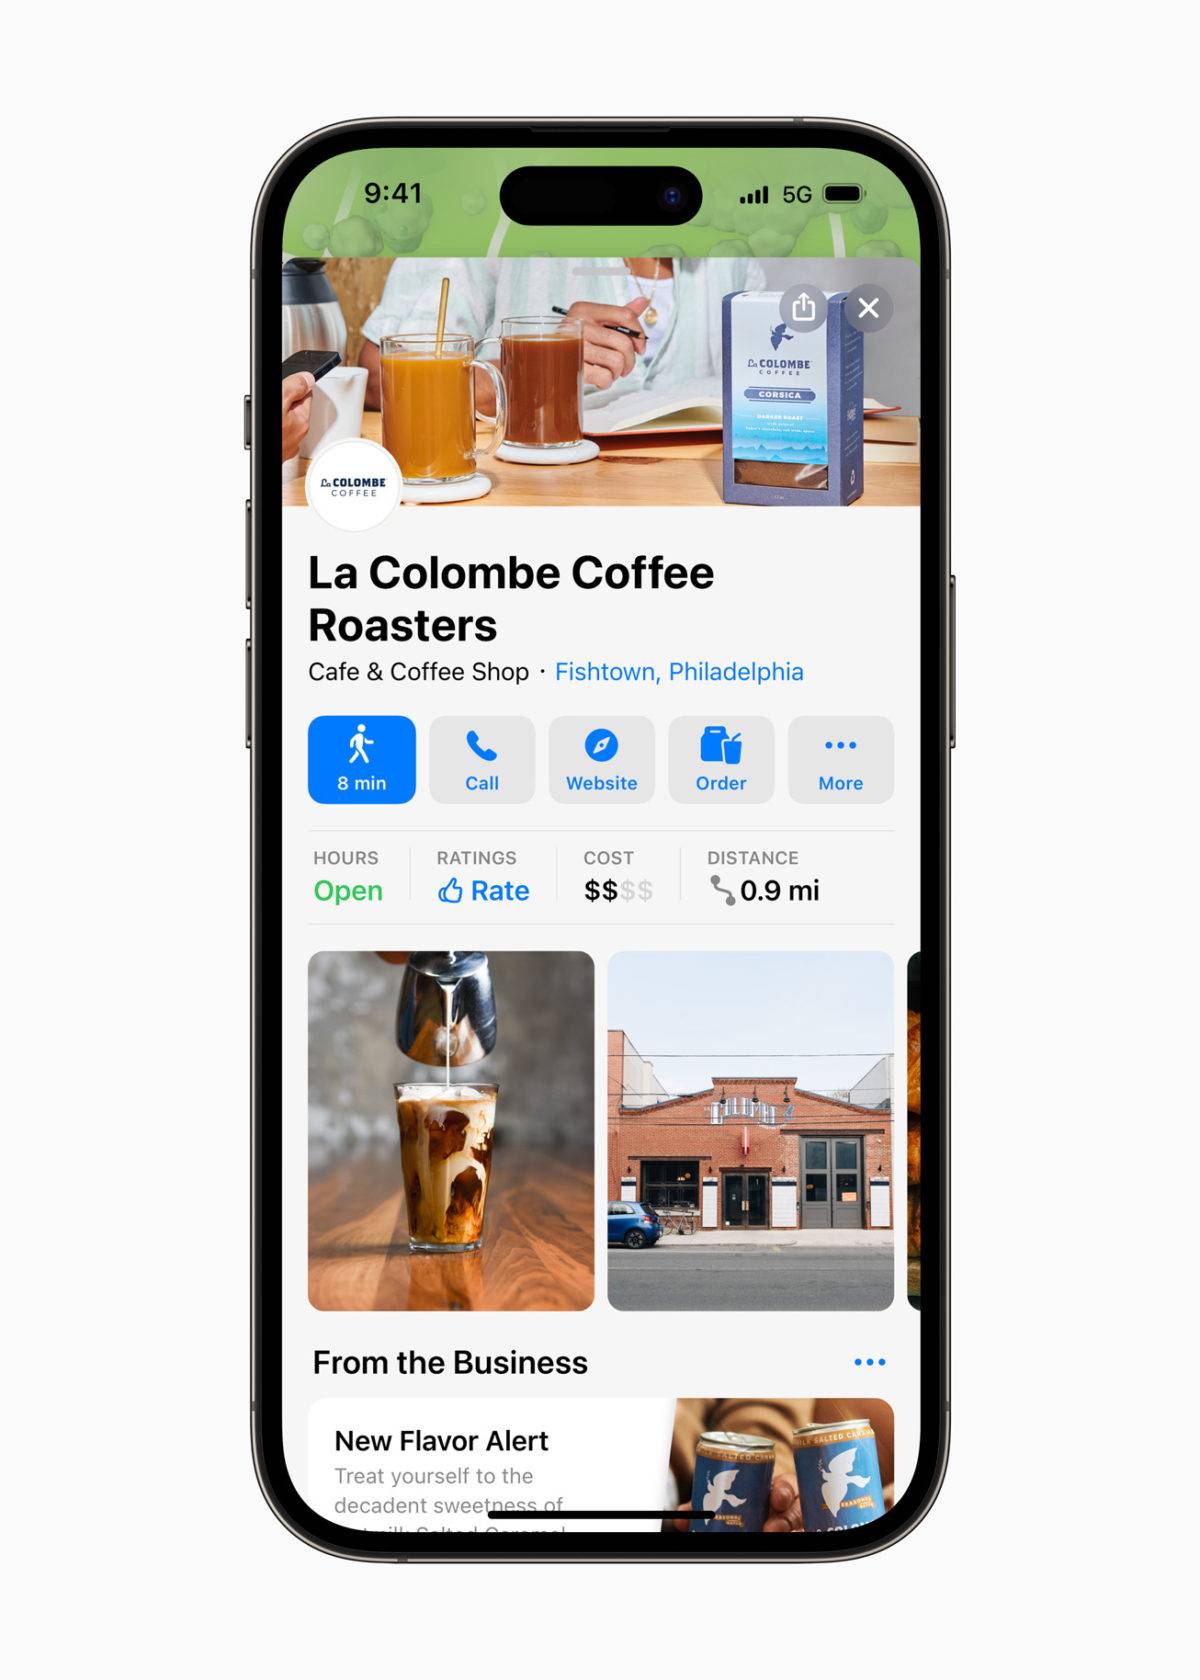 An image of an iphone showing an "Apple placecard" or listing for for La Colombe Coffee Roasters